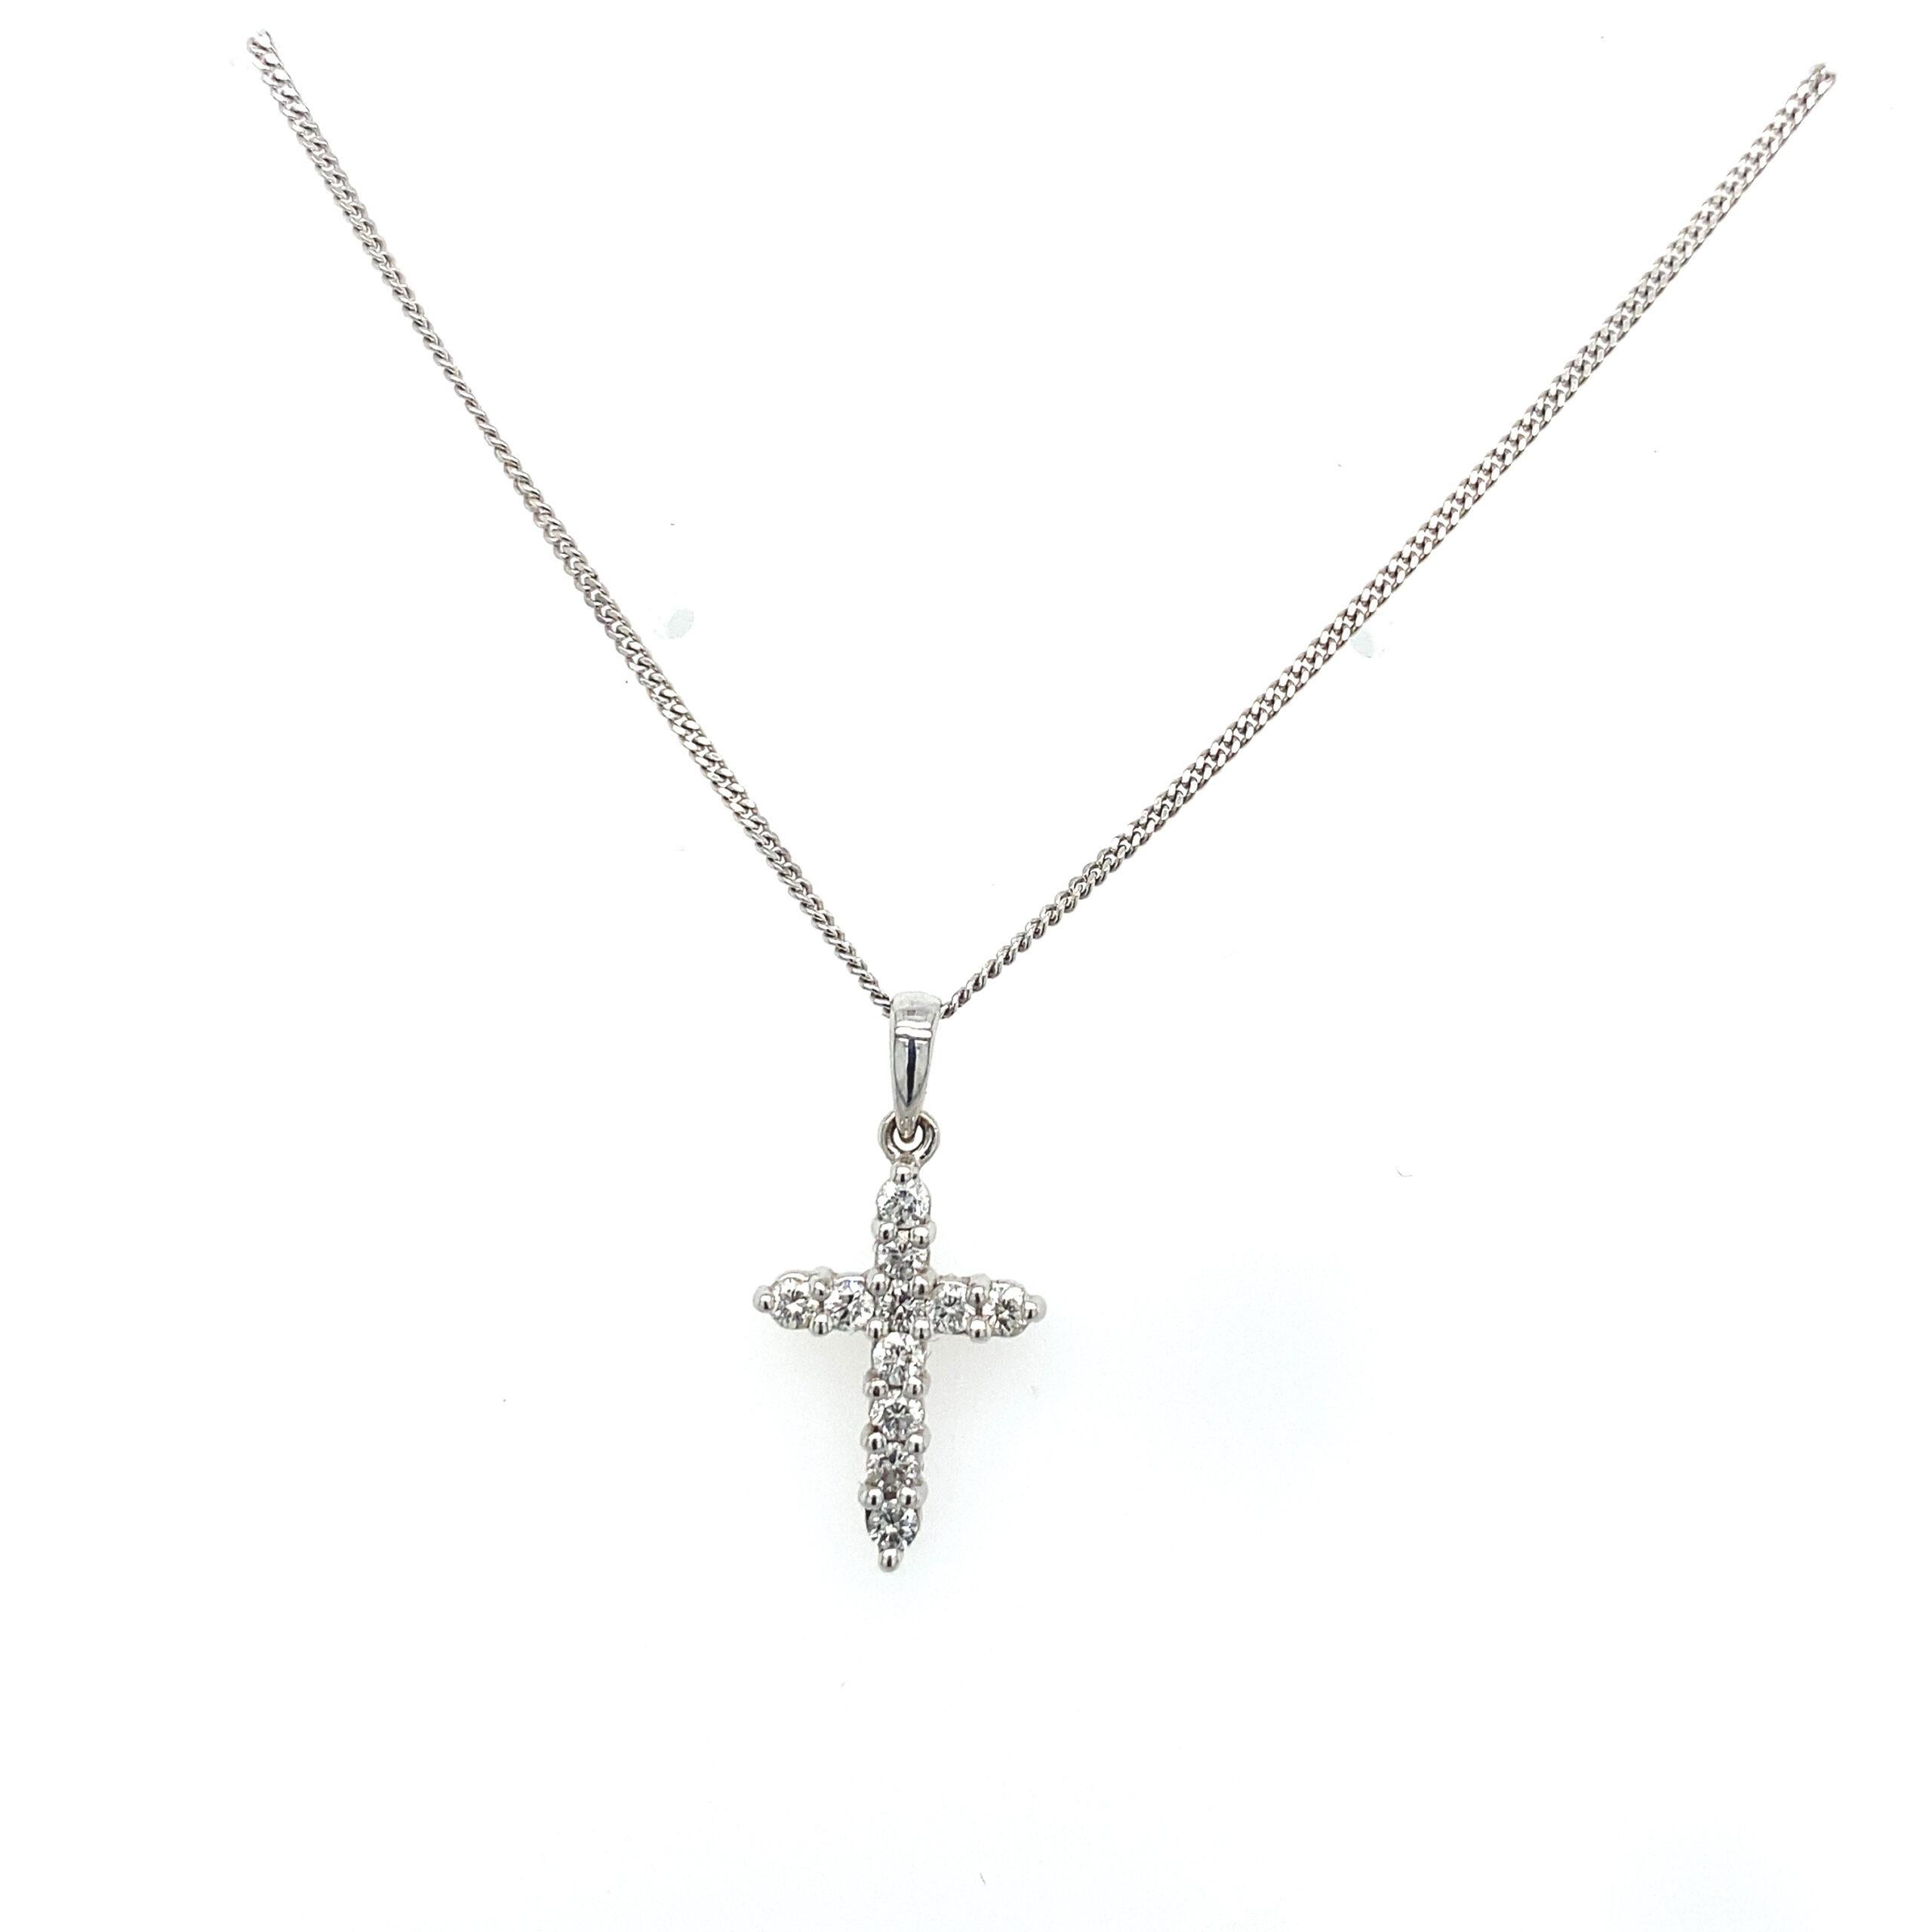 18ct White Gold Diamond Cross, Set with 10 Round Diamonds,0.20ct on 18″ Chain

This elegant Diamond cross pendant is crafted in 18ct White Gold Set with Comes on a 18'' chain.

Additional Information:
Total Diamond Weight: 0.20ct
Diamond Colour: